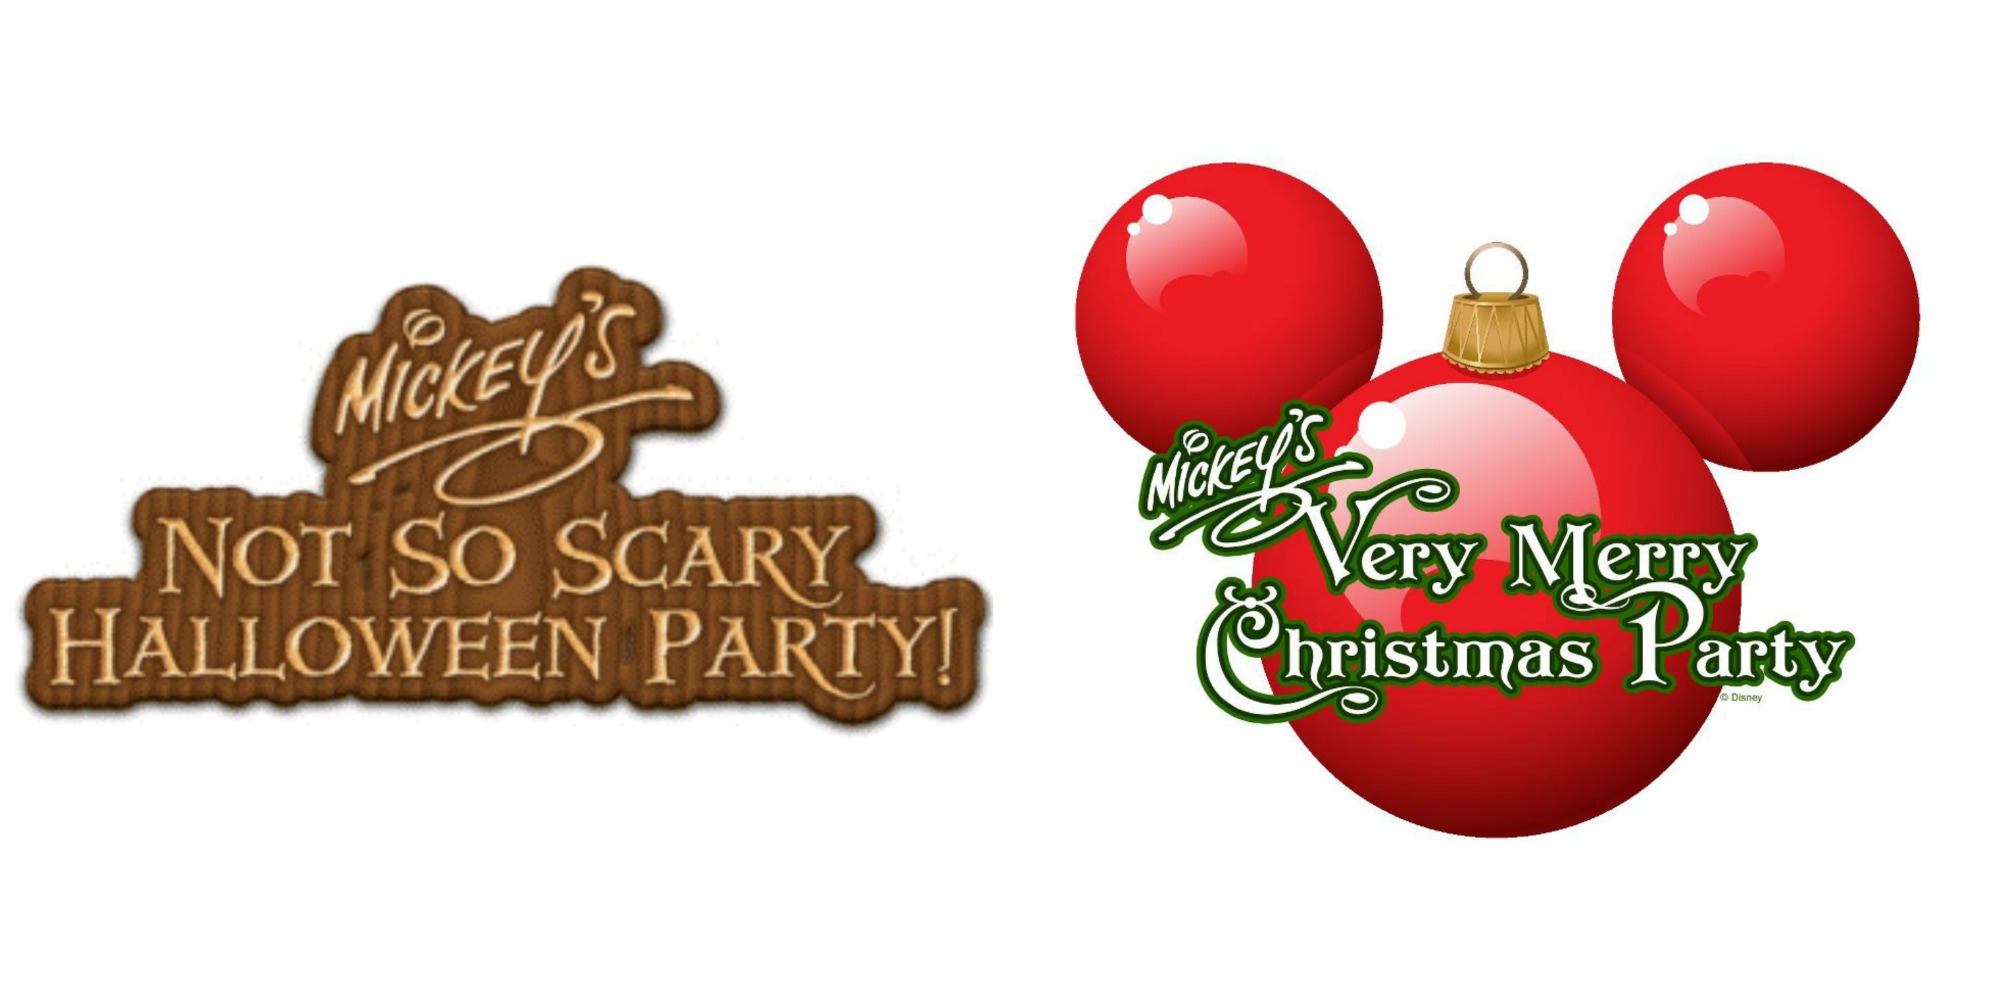 2016 Mickey’s Not So Scary Halloween Party & Mickey’s Very Merry Christmas Party Tickets to go on Sale May 5th